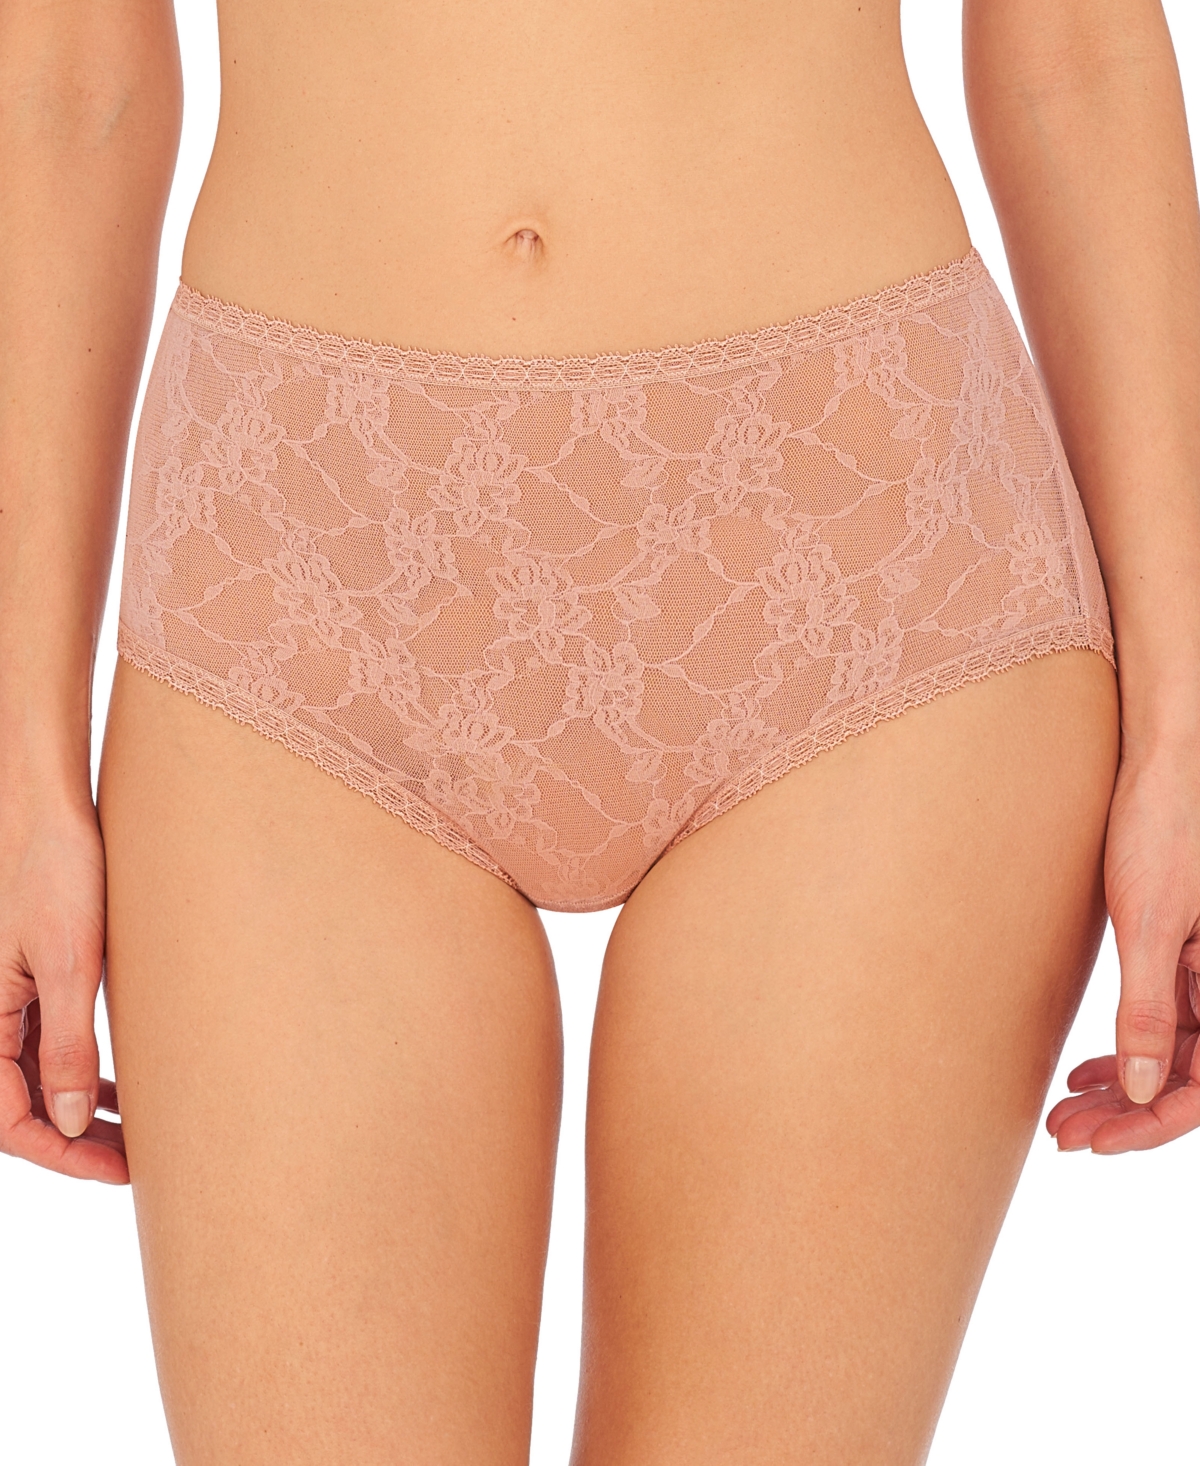 Women's Bliss Allure One Size Lace Full Brief Underwear 778303 - Cafe